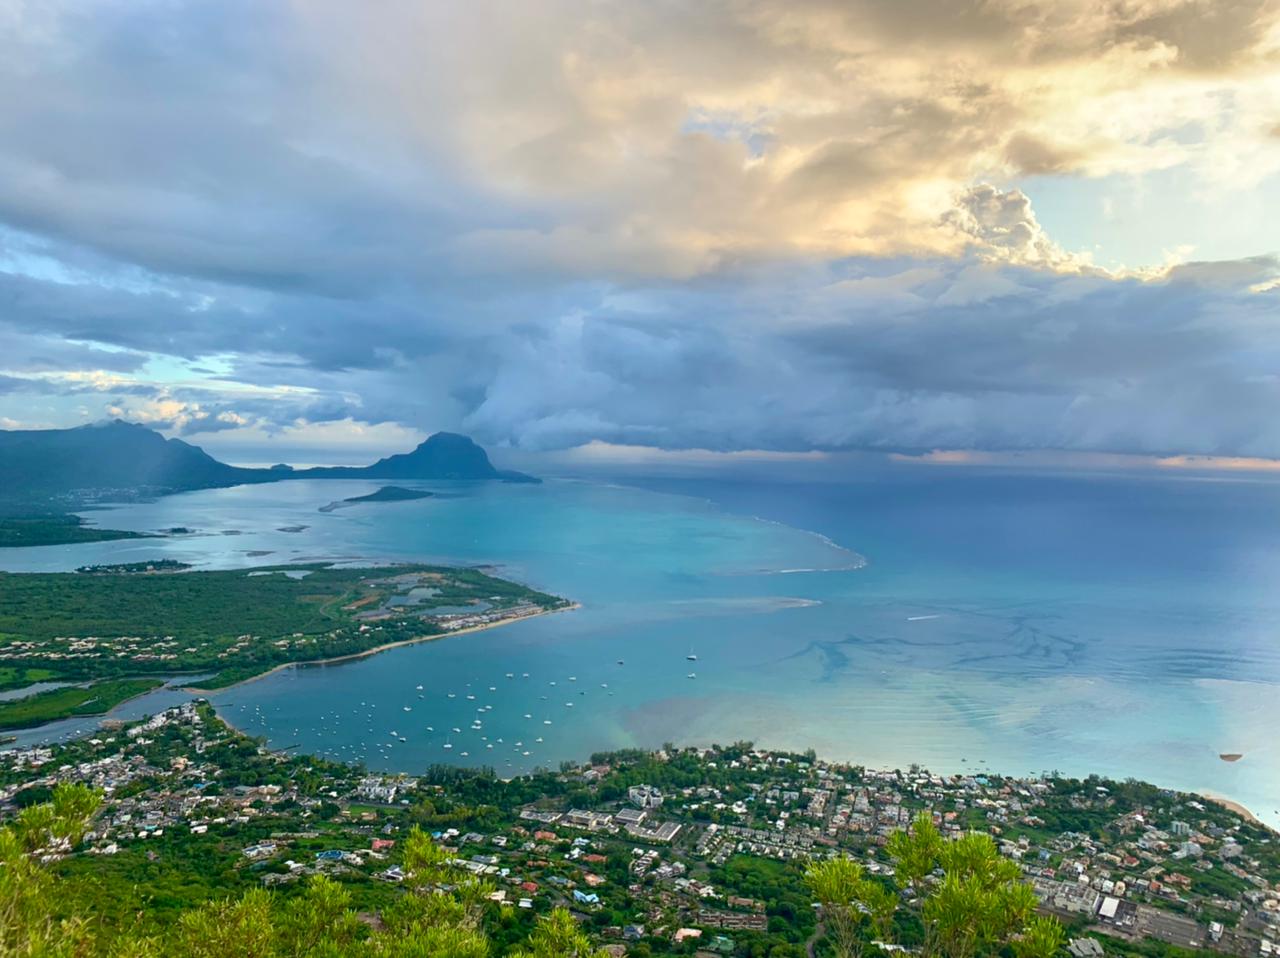 One of the views from the top of La Tourelle at sunset, with La Morne in the distance. PA Photo / Elodie Lagourgue